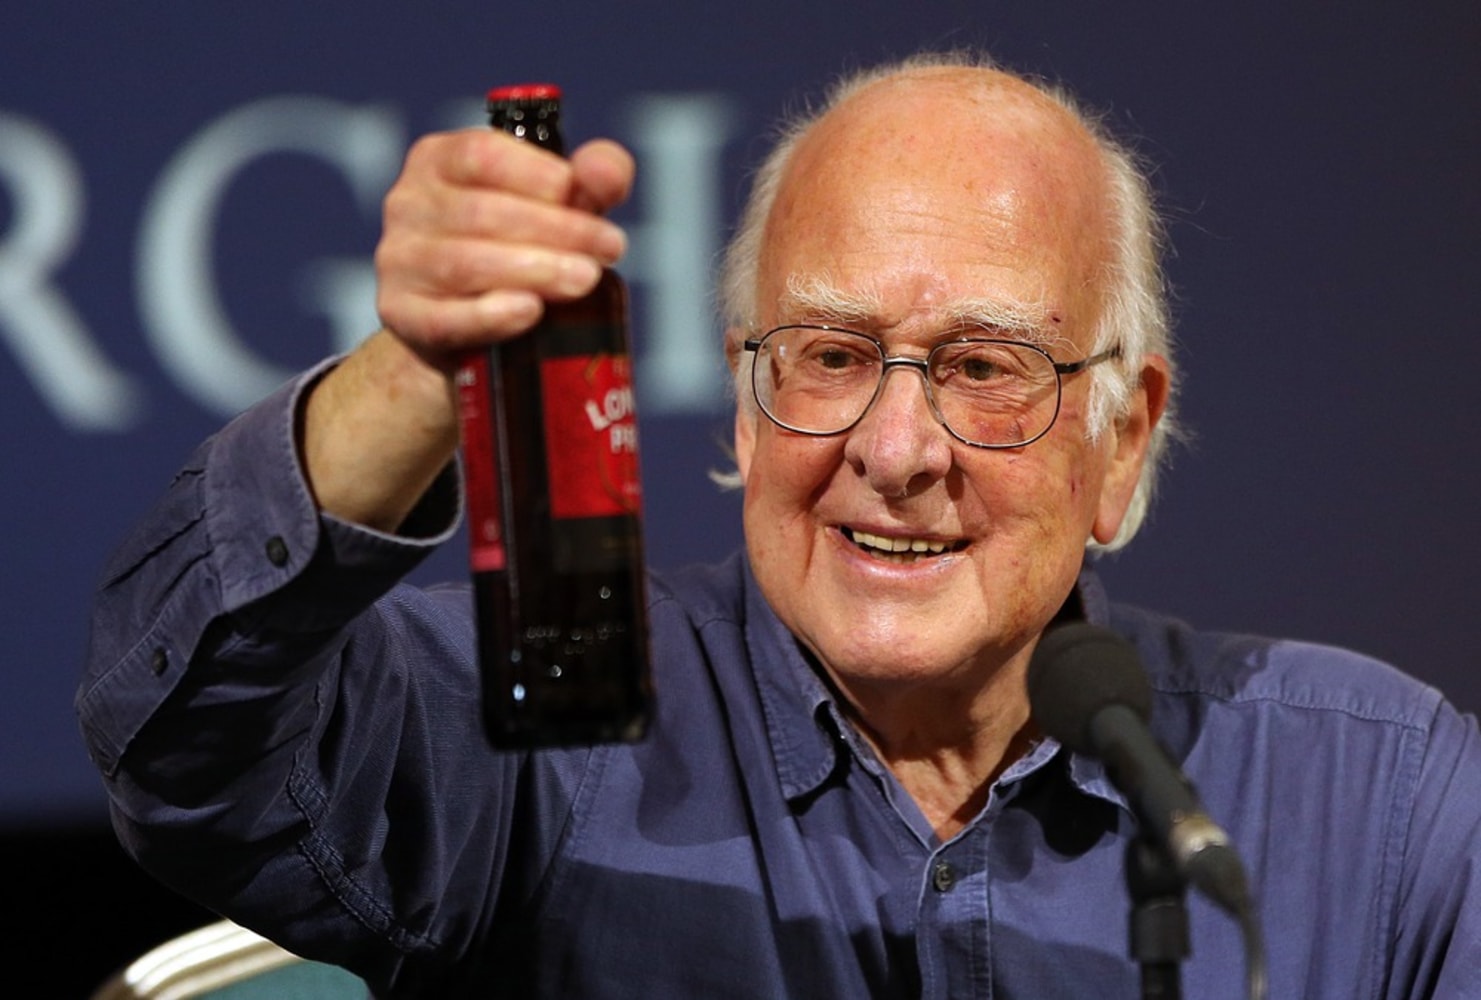 'What news?': How Higgs found out he won the Nobel Prize for physics